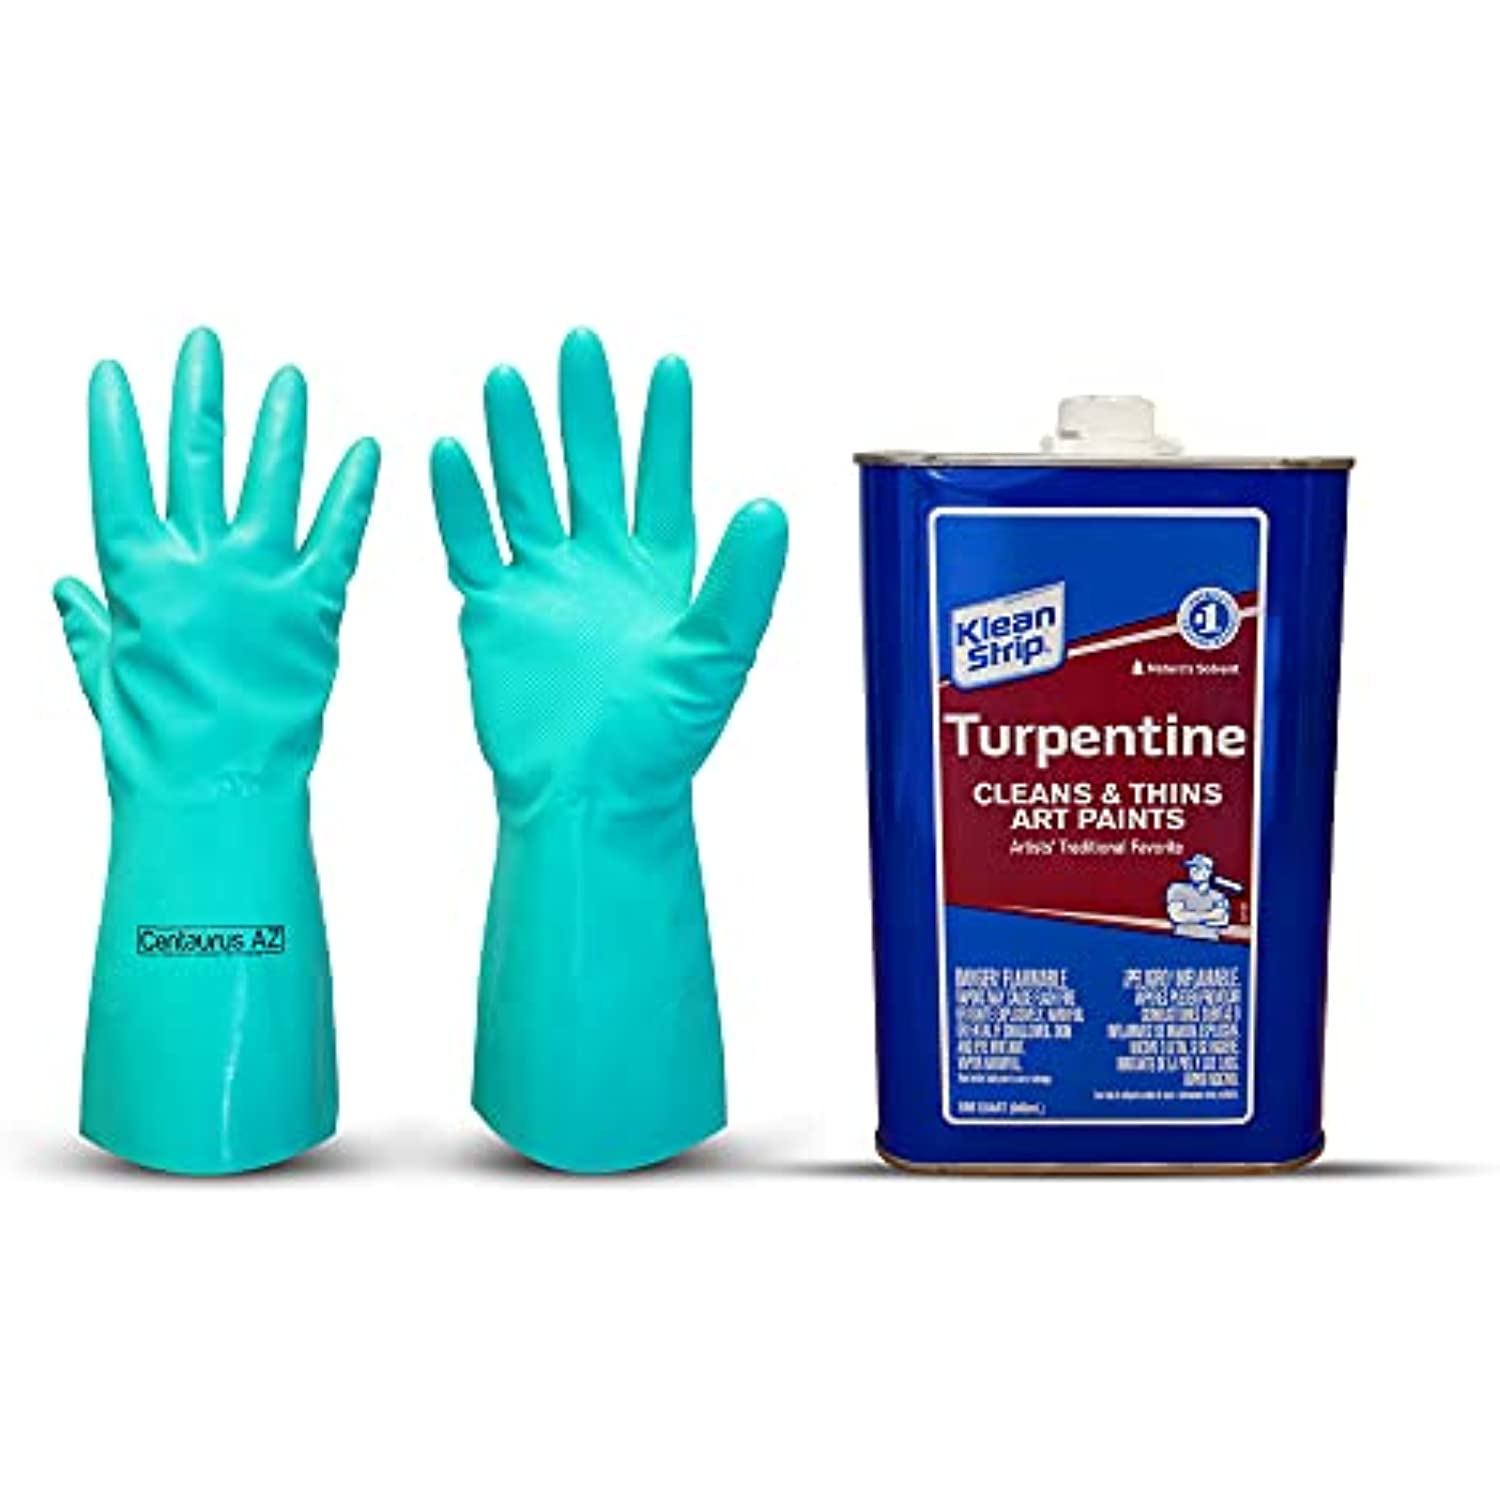 Klean Strip Turpentine 1- Quart Degreaser Tools Parts Machinery Wood Stains Thins Art Paints Dry Faster Less Toxic High Solvency Now Comes with Chemical Resistant Gloves by Centaurus AZ